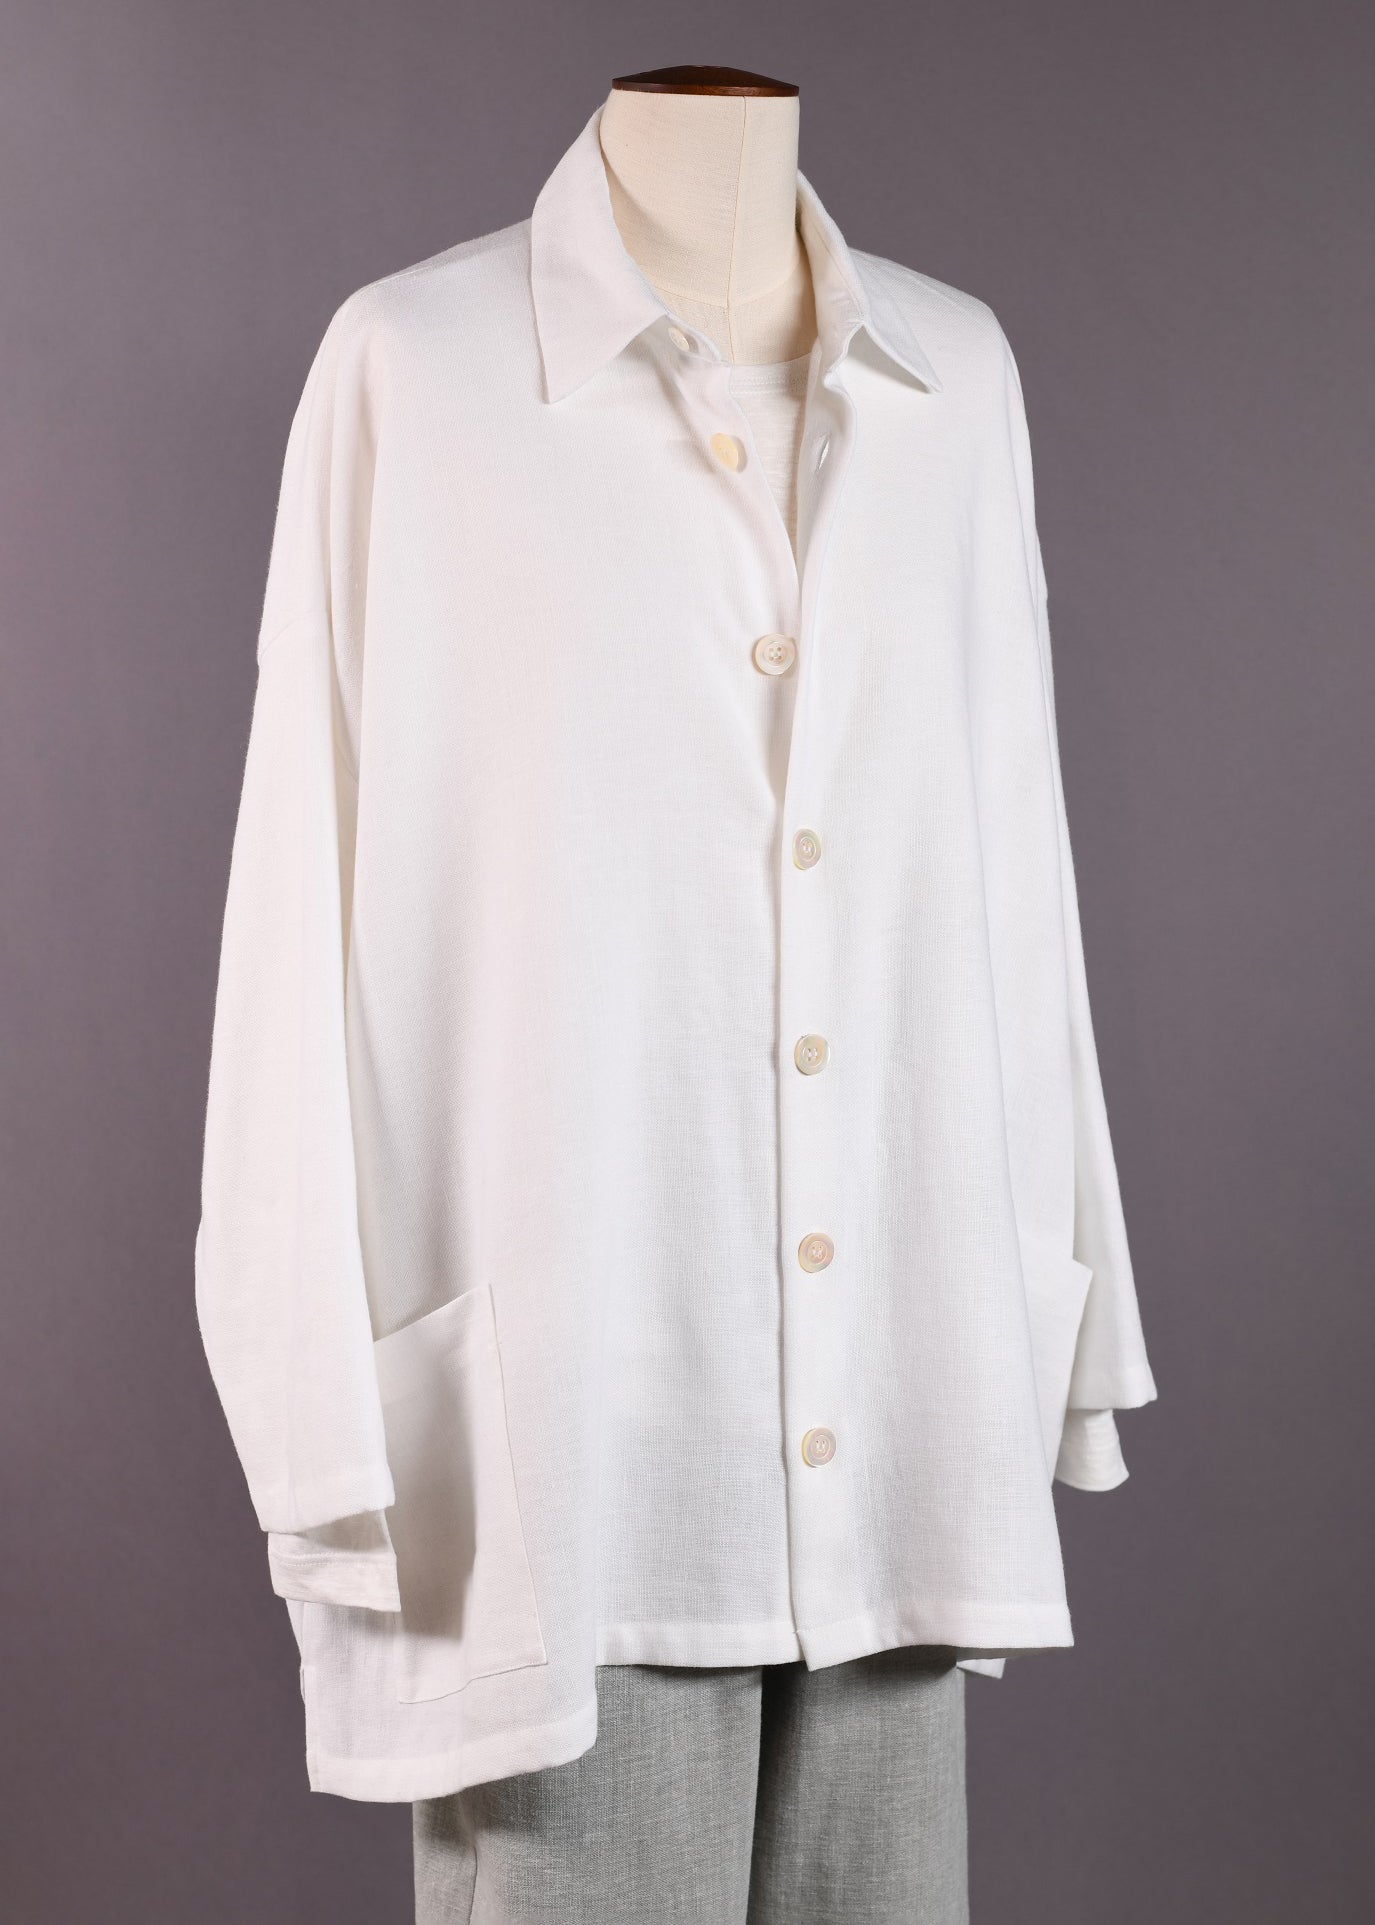 wide a-line back pleat jacket with collar - long